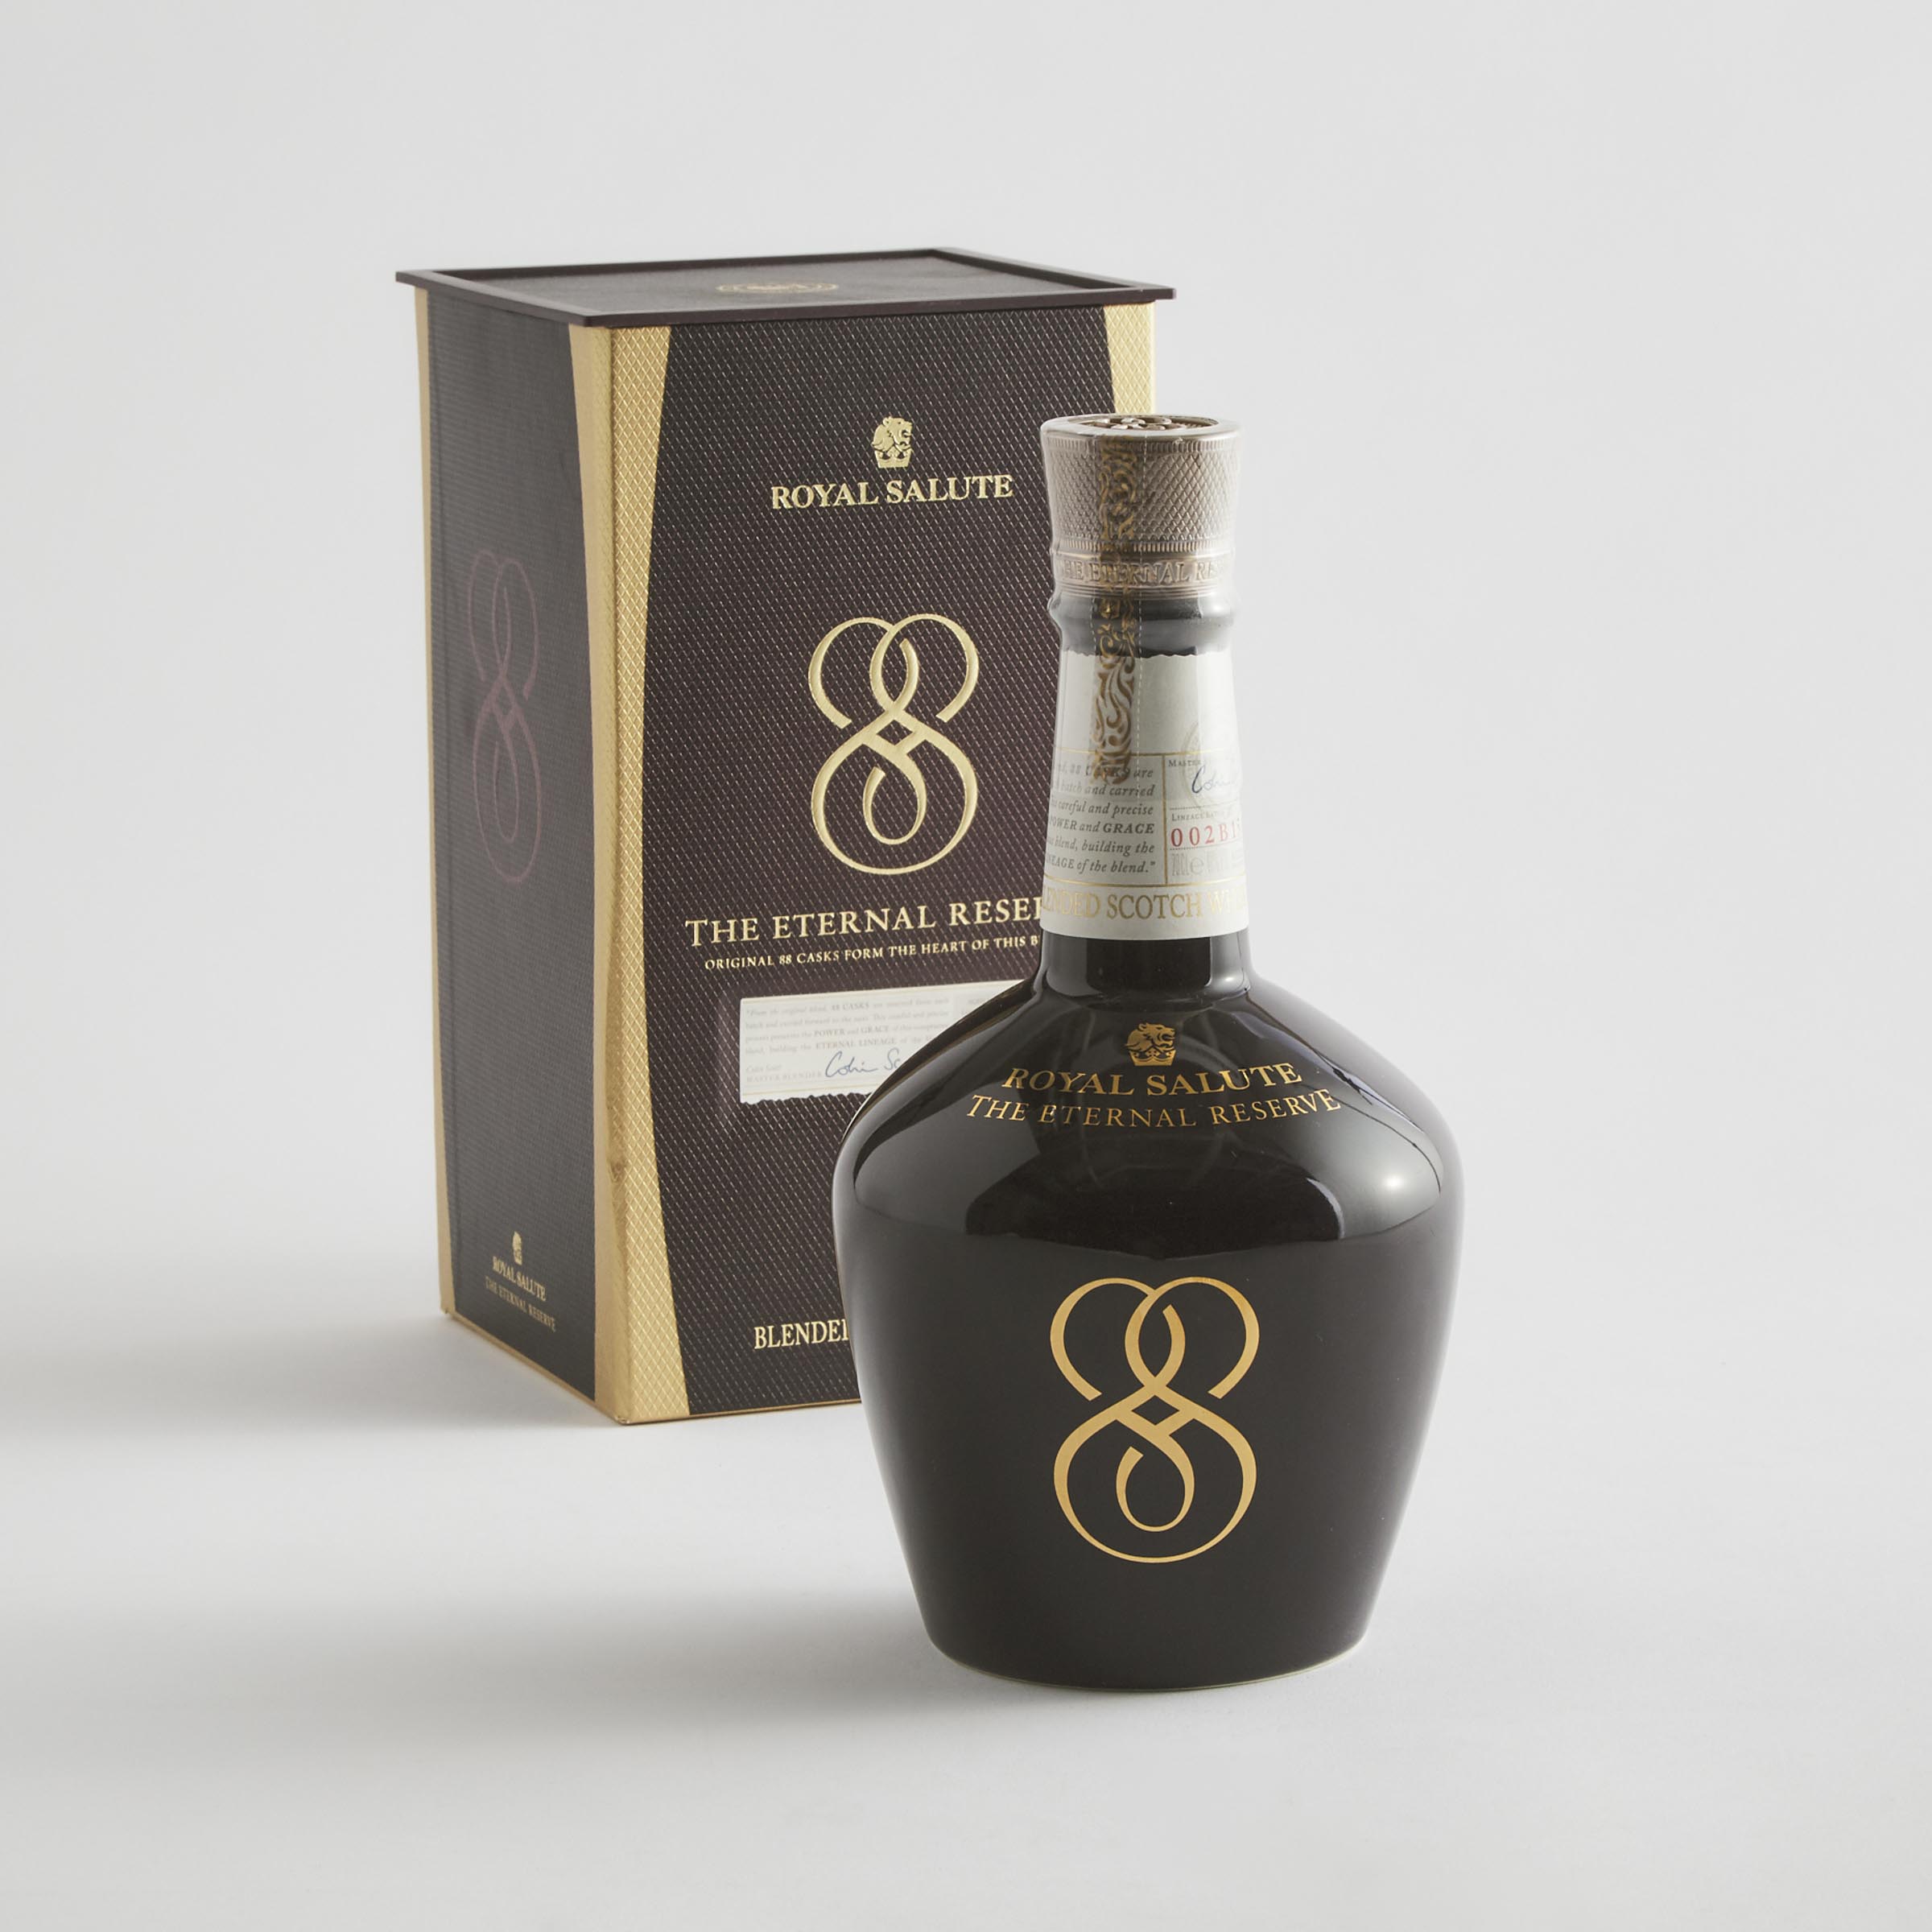 ROYAL SALUTE BLENDED SCOTCH WHISKY 21 YEARS (ONE 700 ML)